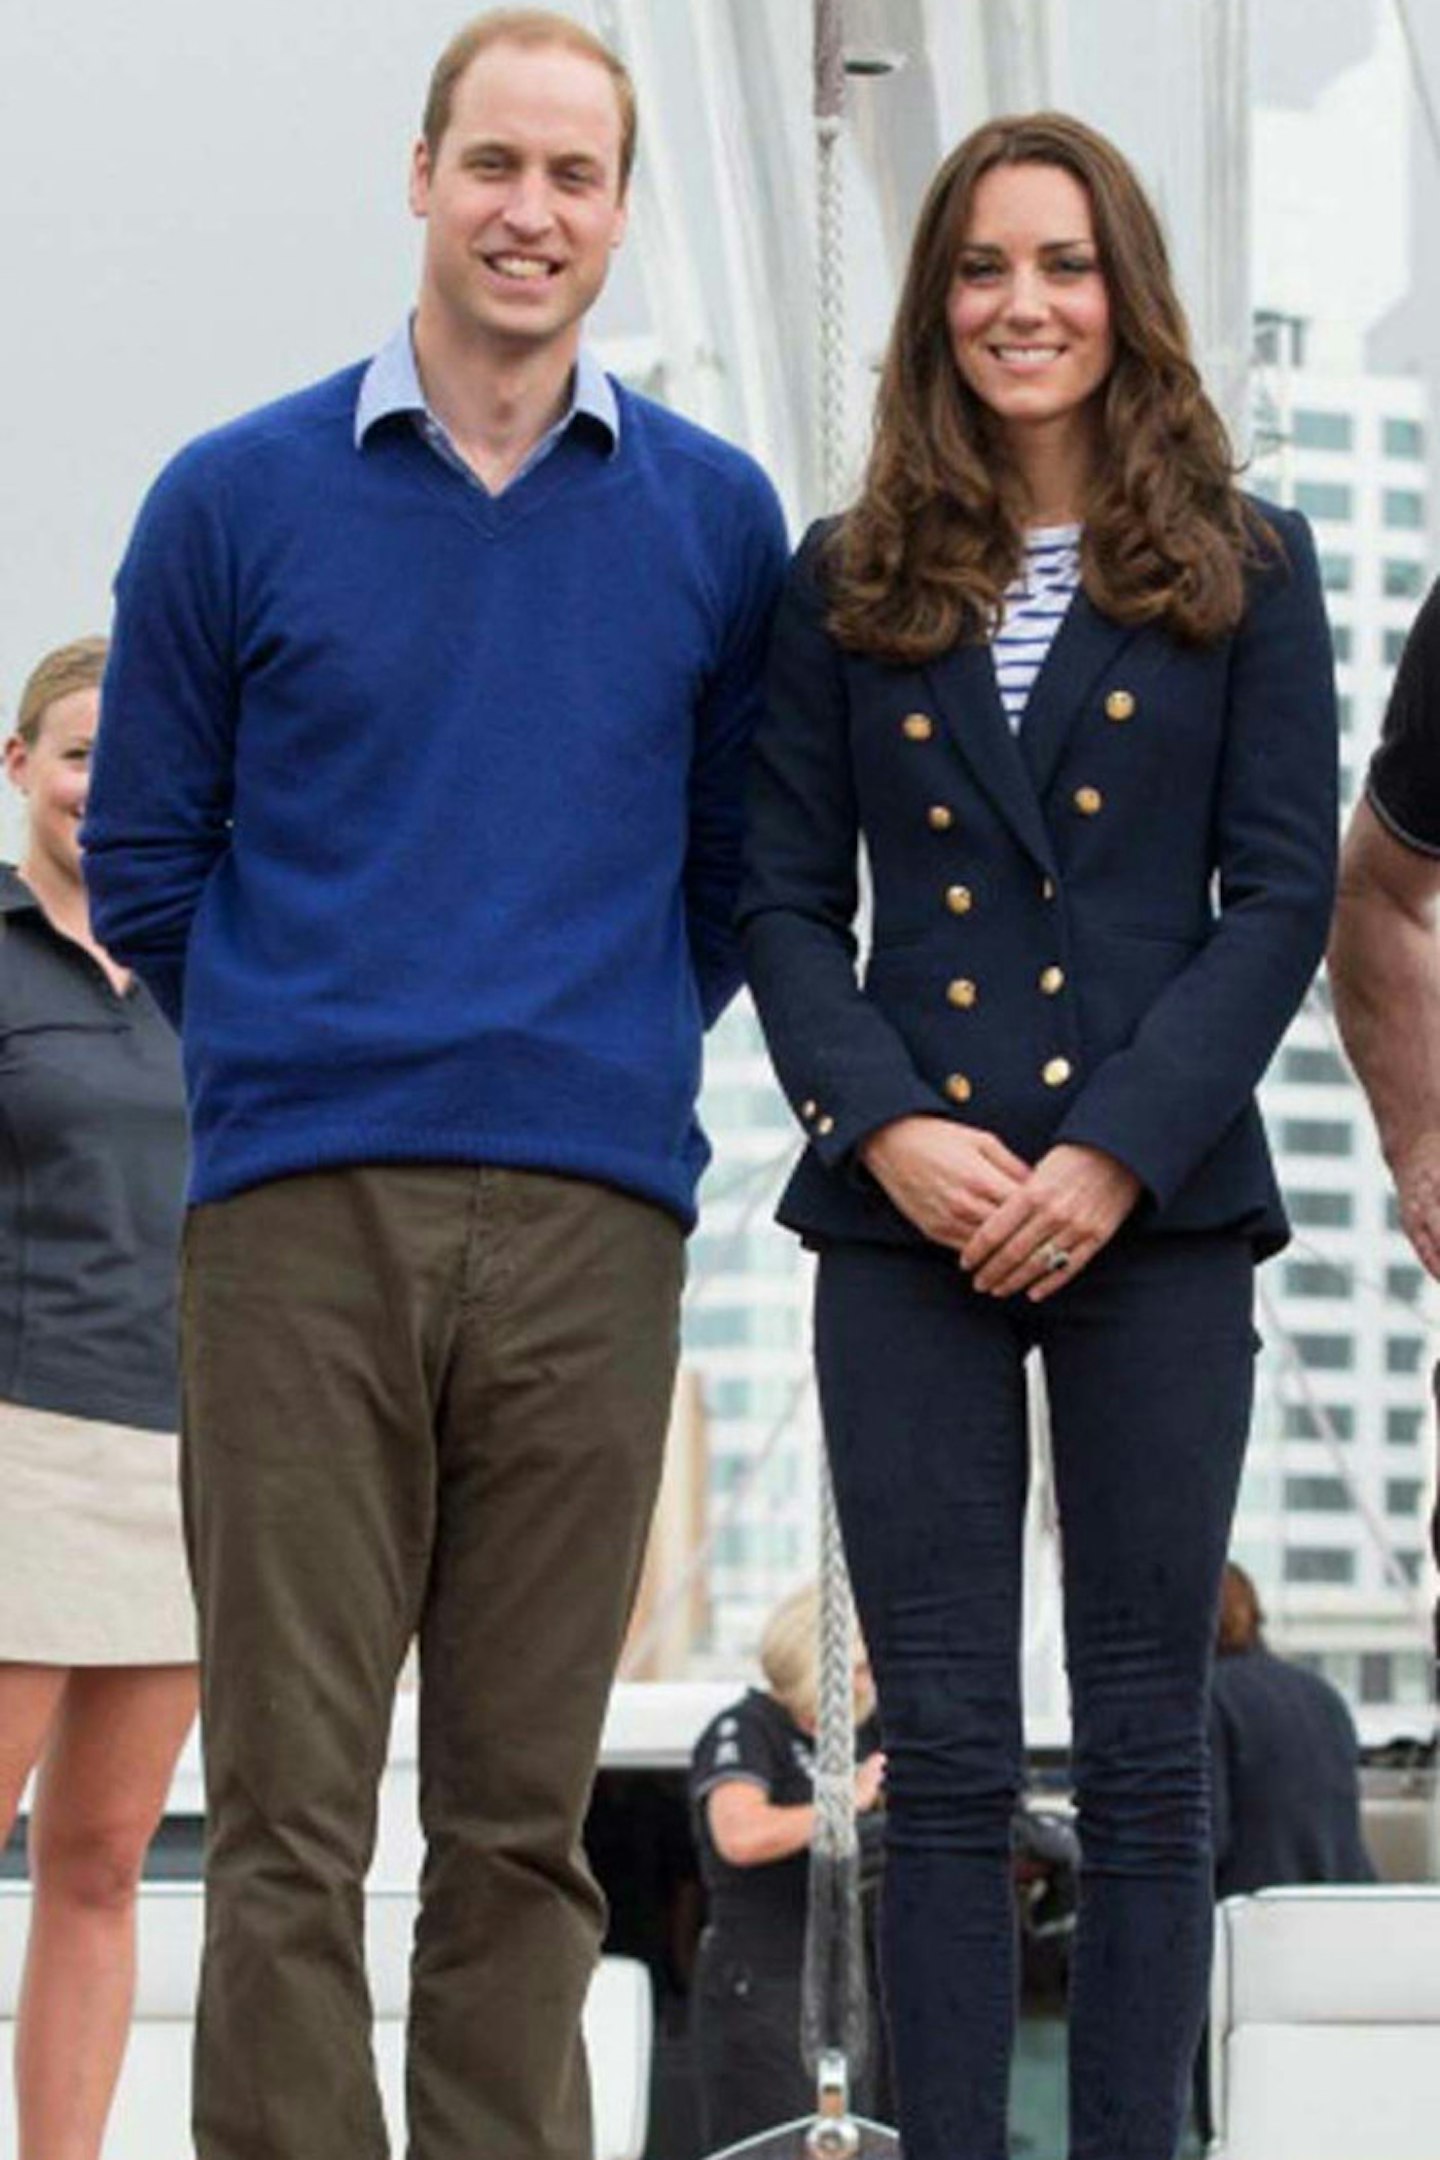 The Duchess of Cambridge in Zara and J Brand at Auckland harbour, New Zealand, 11 April 2014